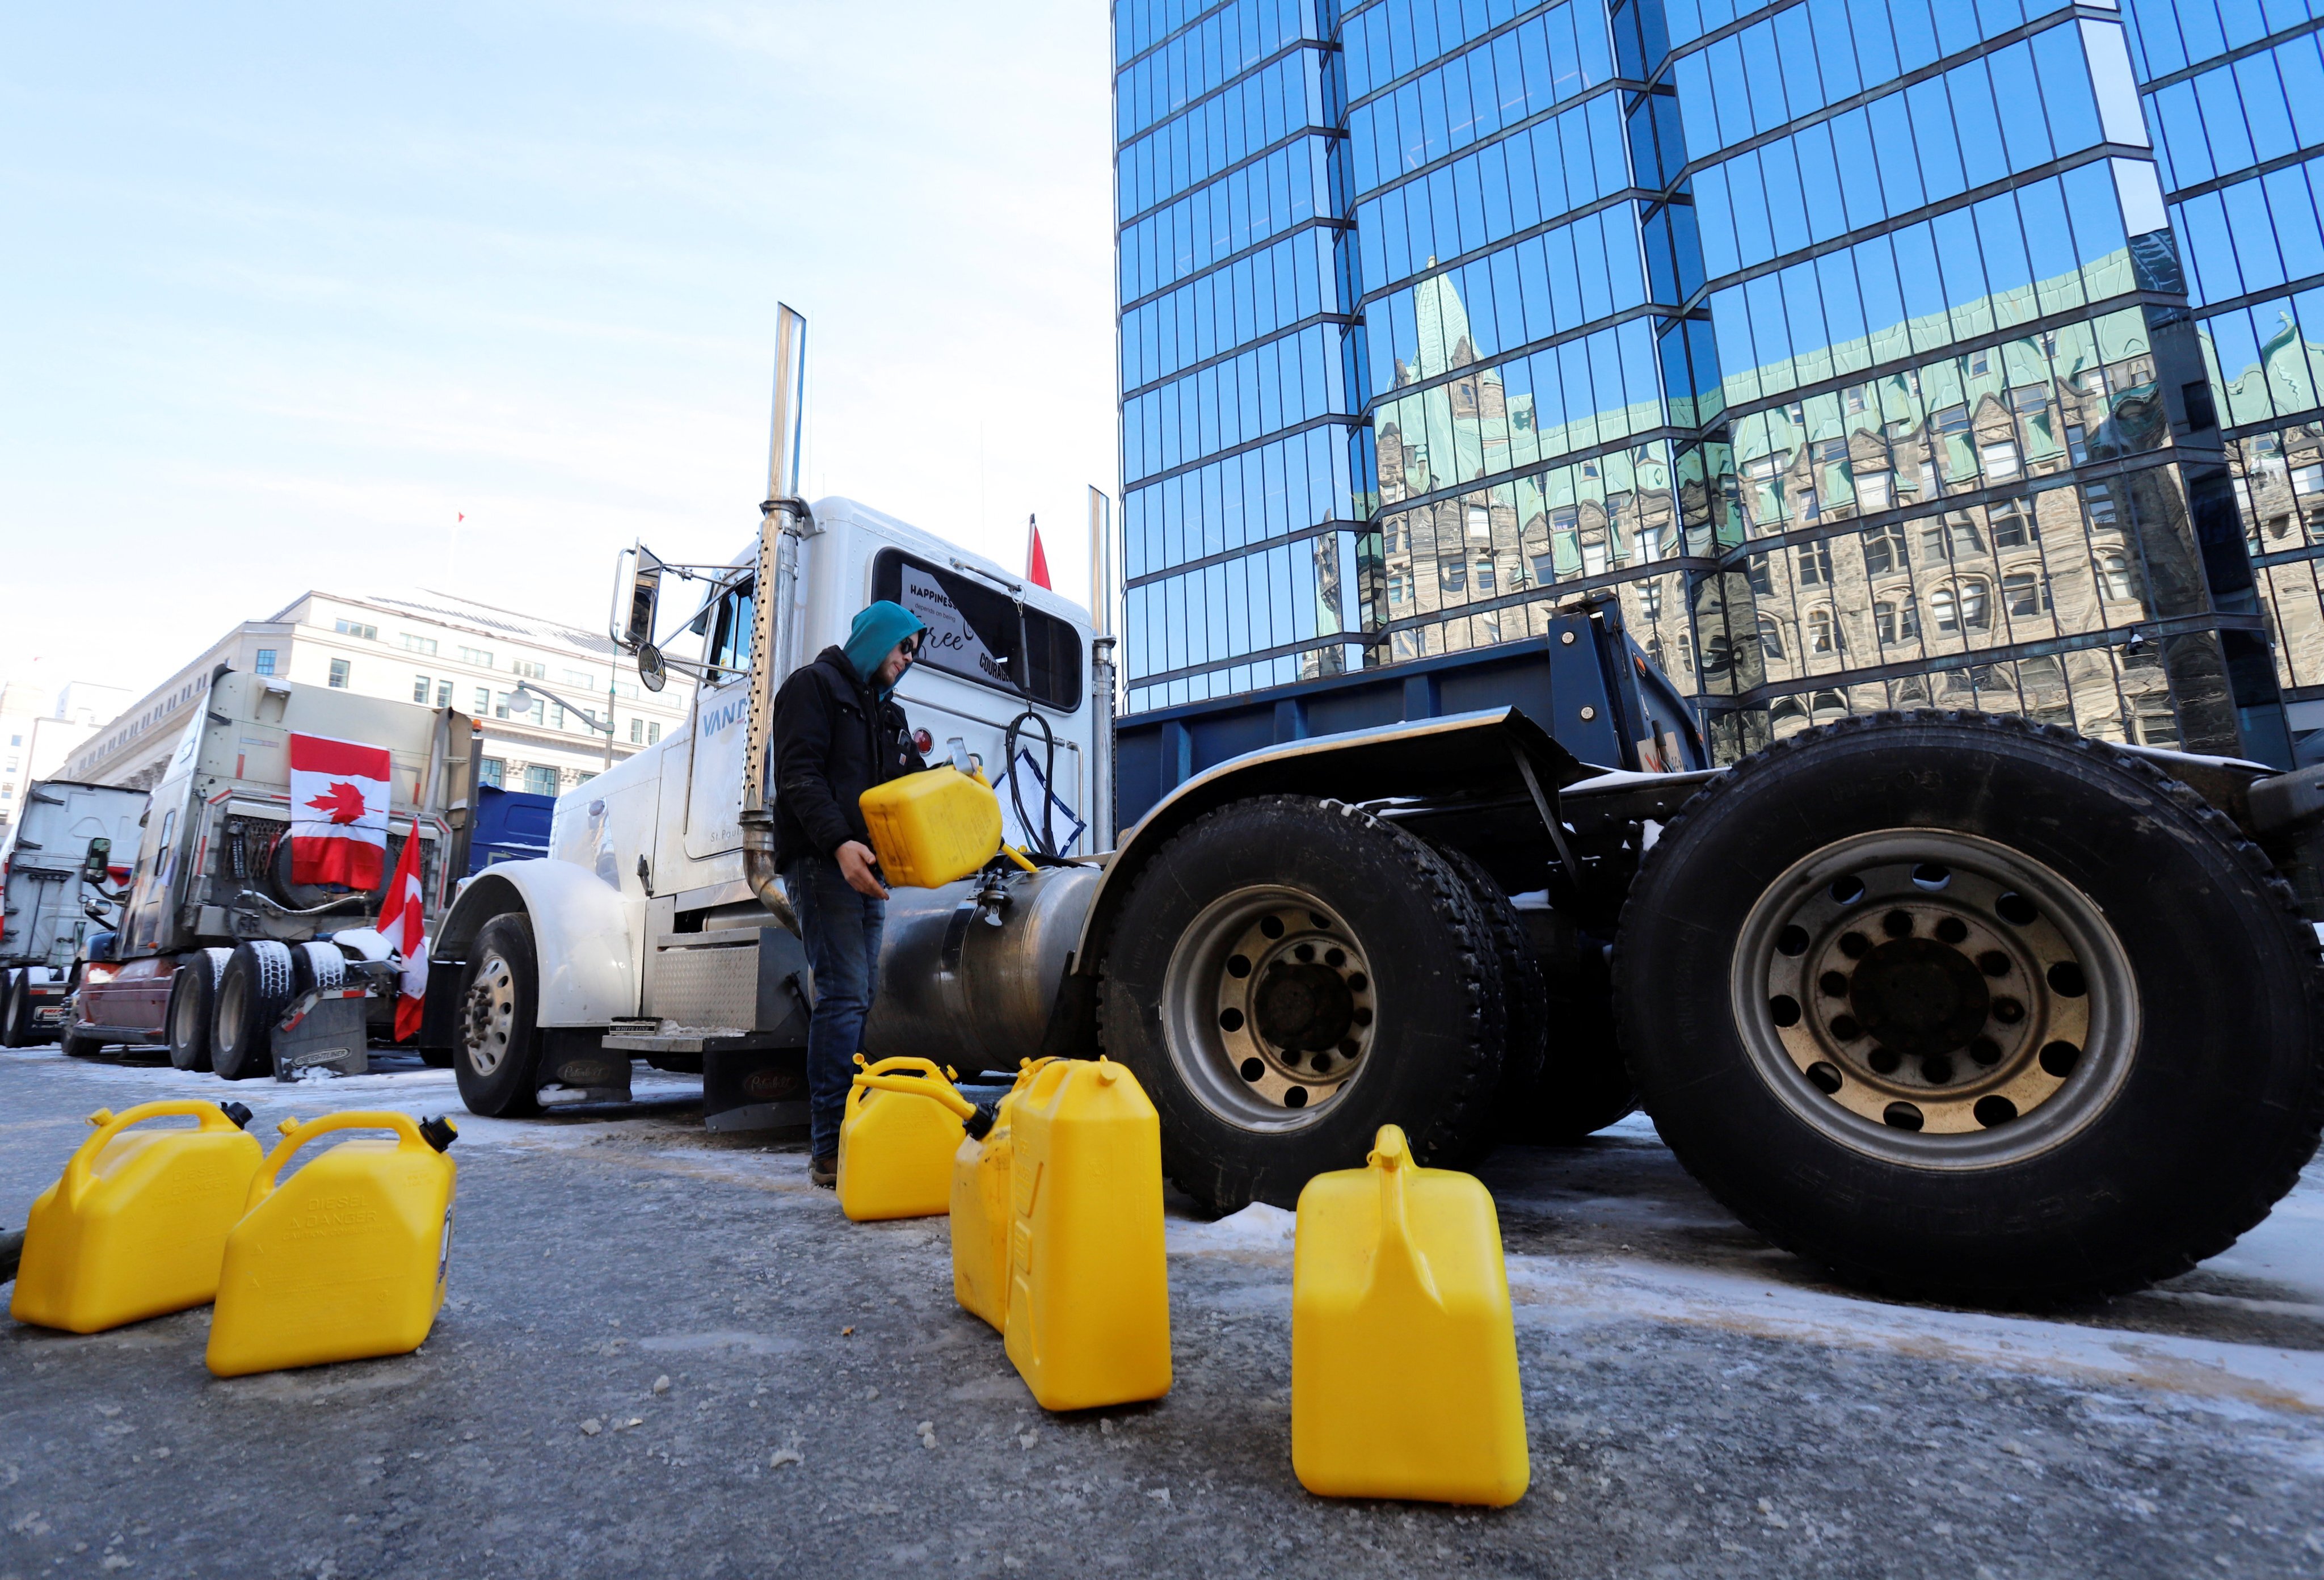 A person fuels a truck on Monday after police said they would be targeting the protestors’ fuel supply in Ottawa. Photo: Reuters